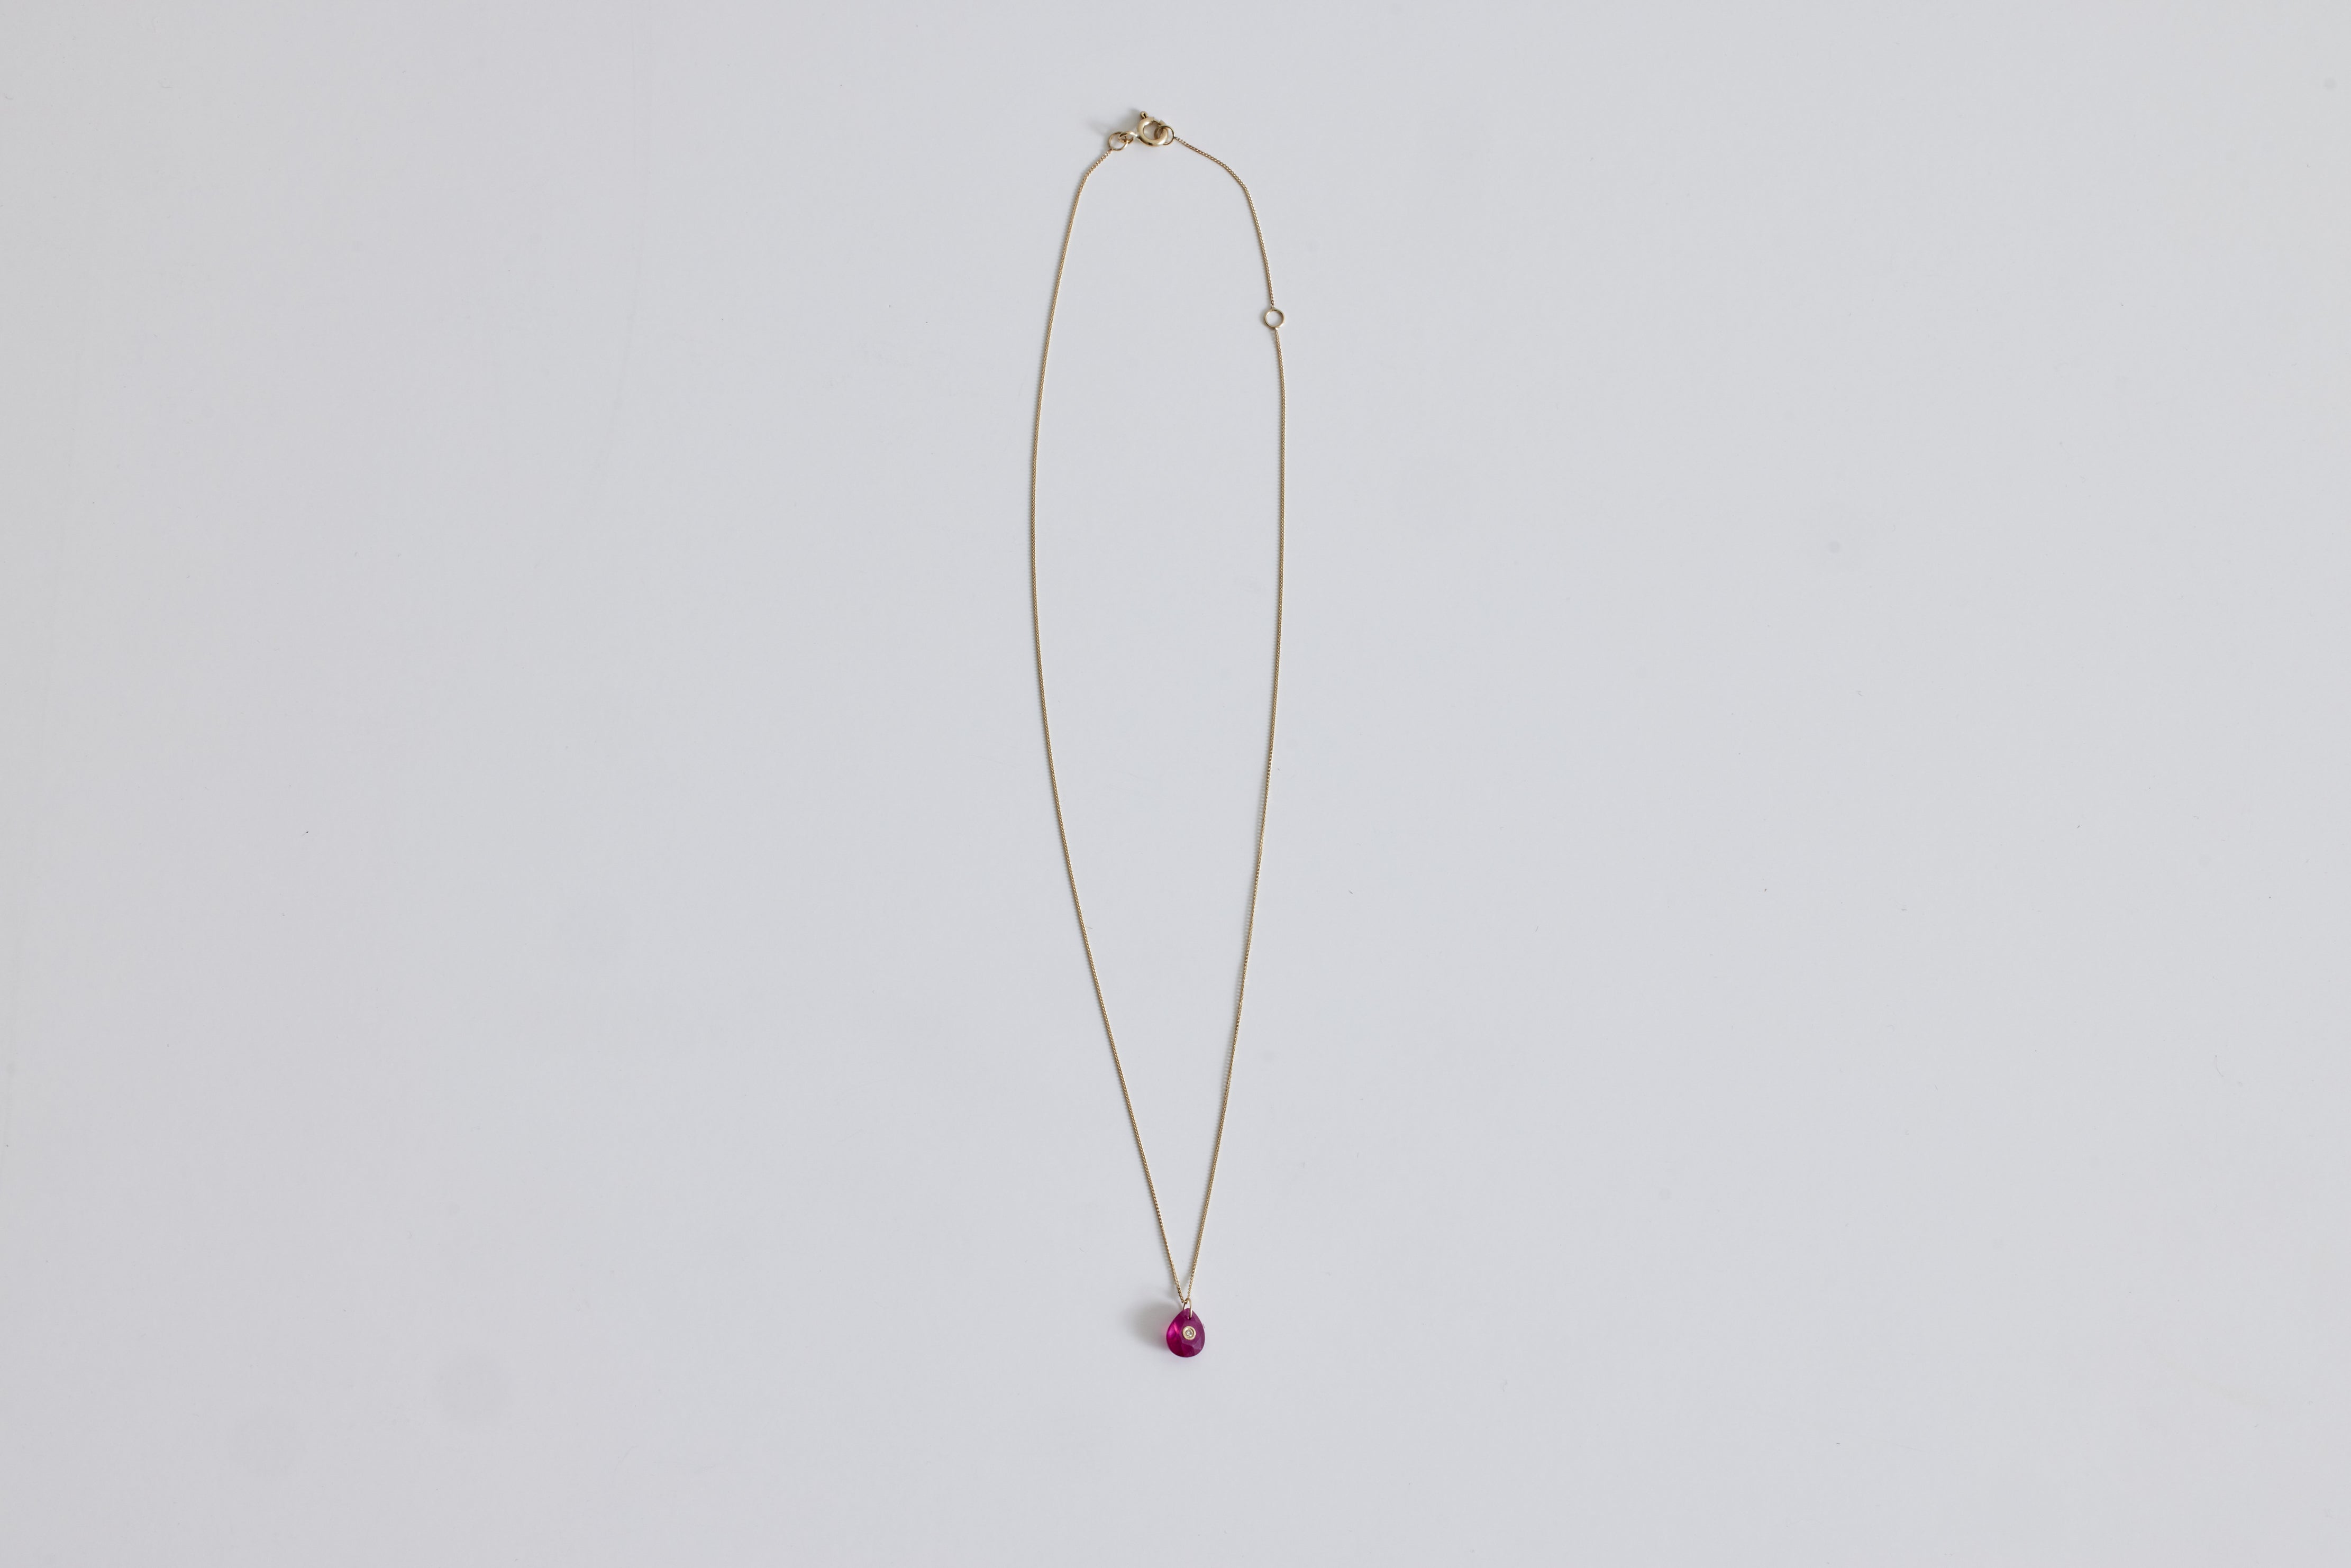 Pascale Monvoisin, Orso N°1 Collier Necklace, Ruby